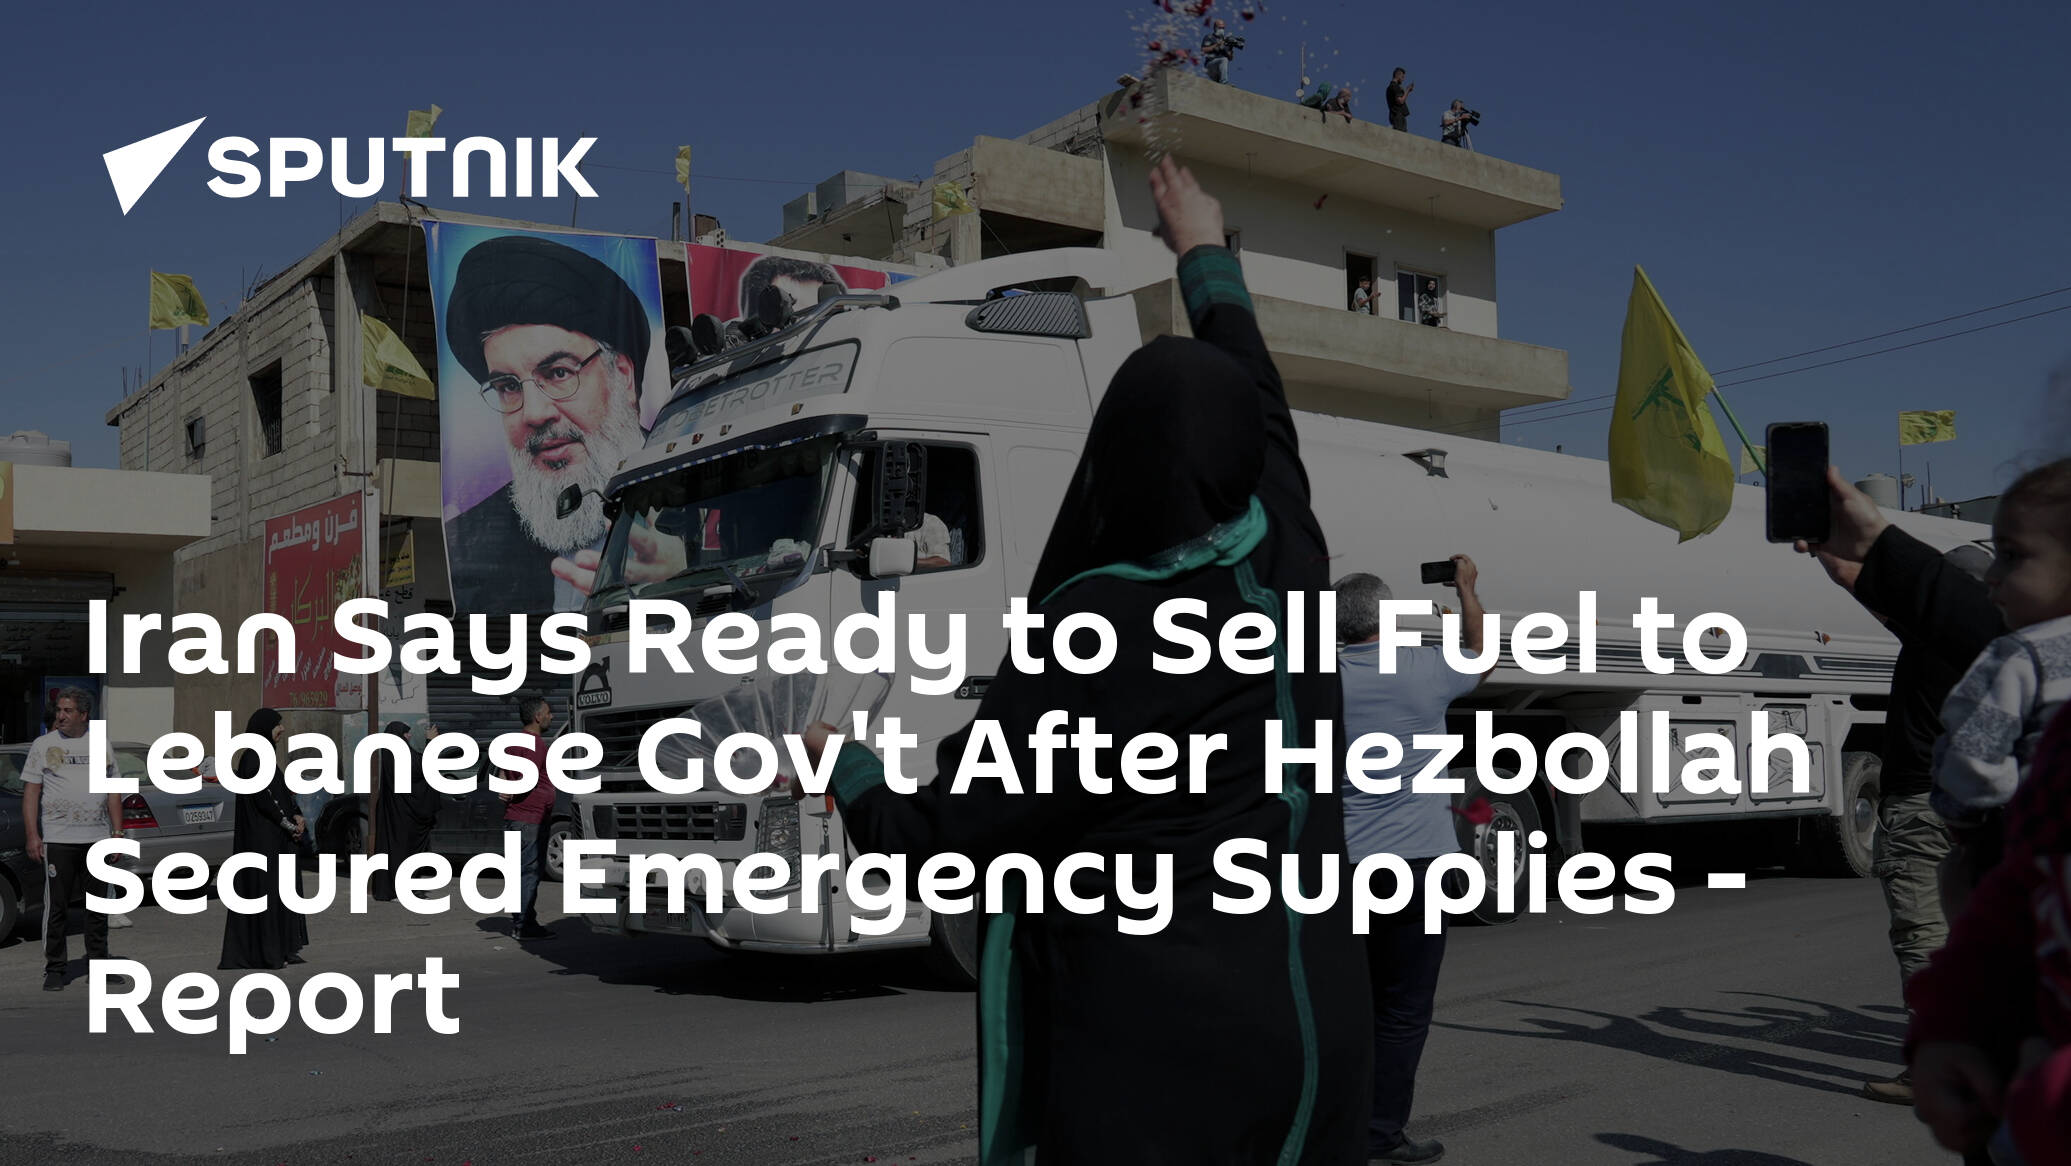 Iran Says Ready to Sell Fuel to Lebanese Gov't After Hezbollah Secured Emergency Supplies - Report